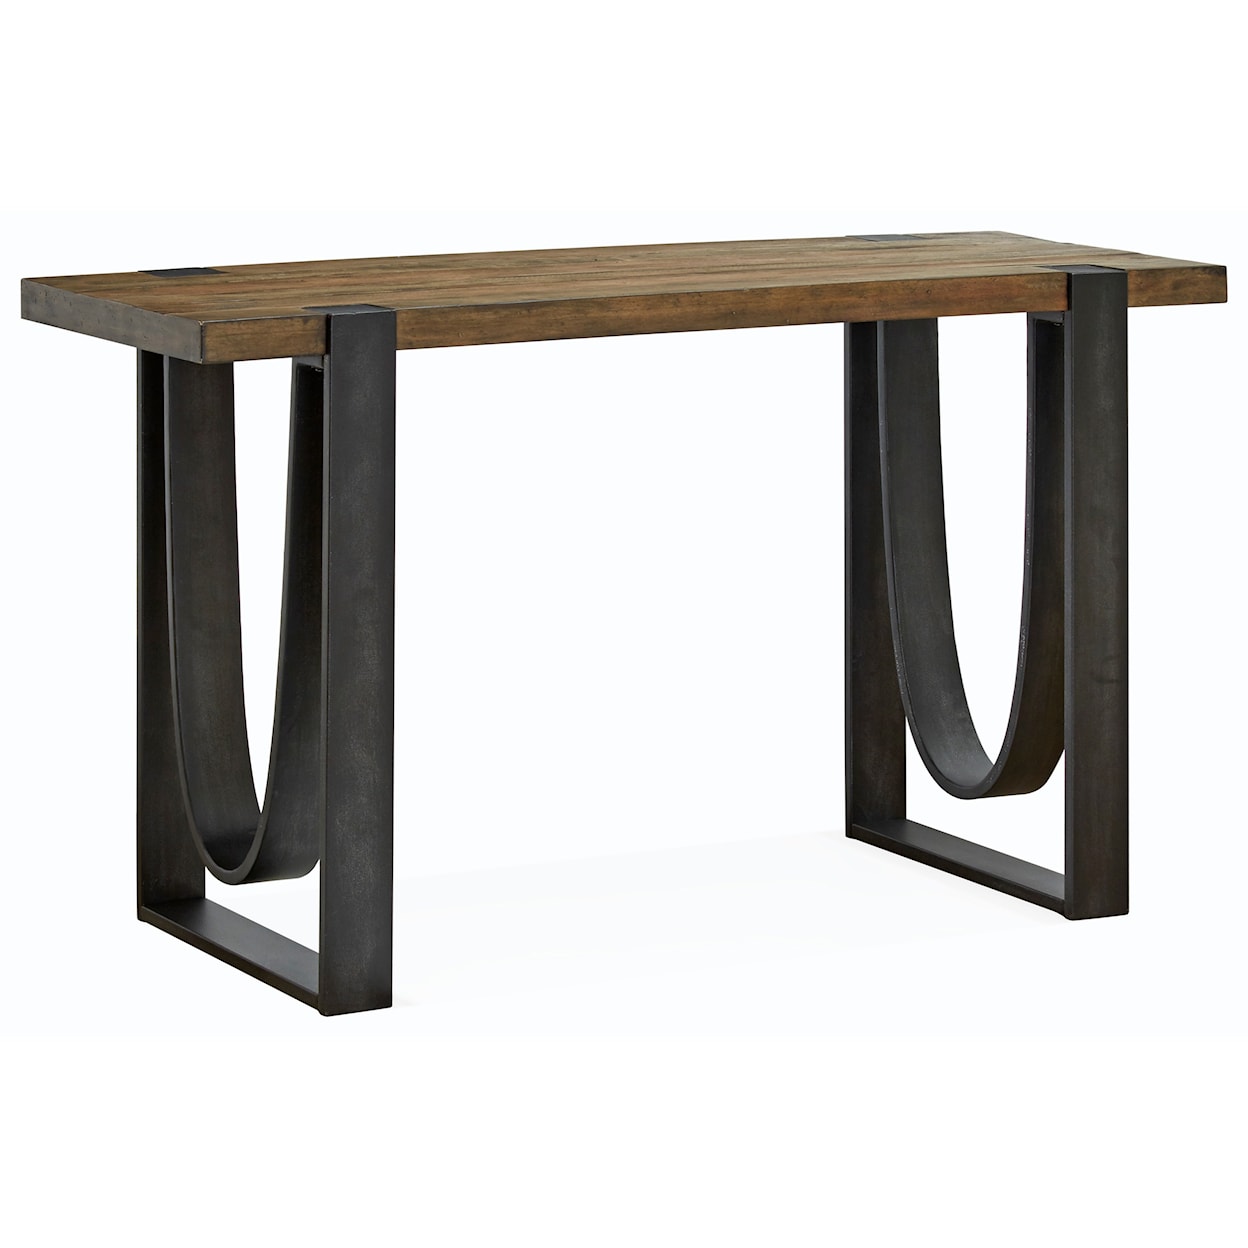 Magnussen Home Bowden Occasional Tables Rectangular Sofa Table